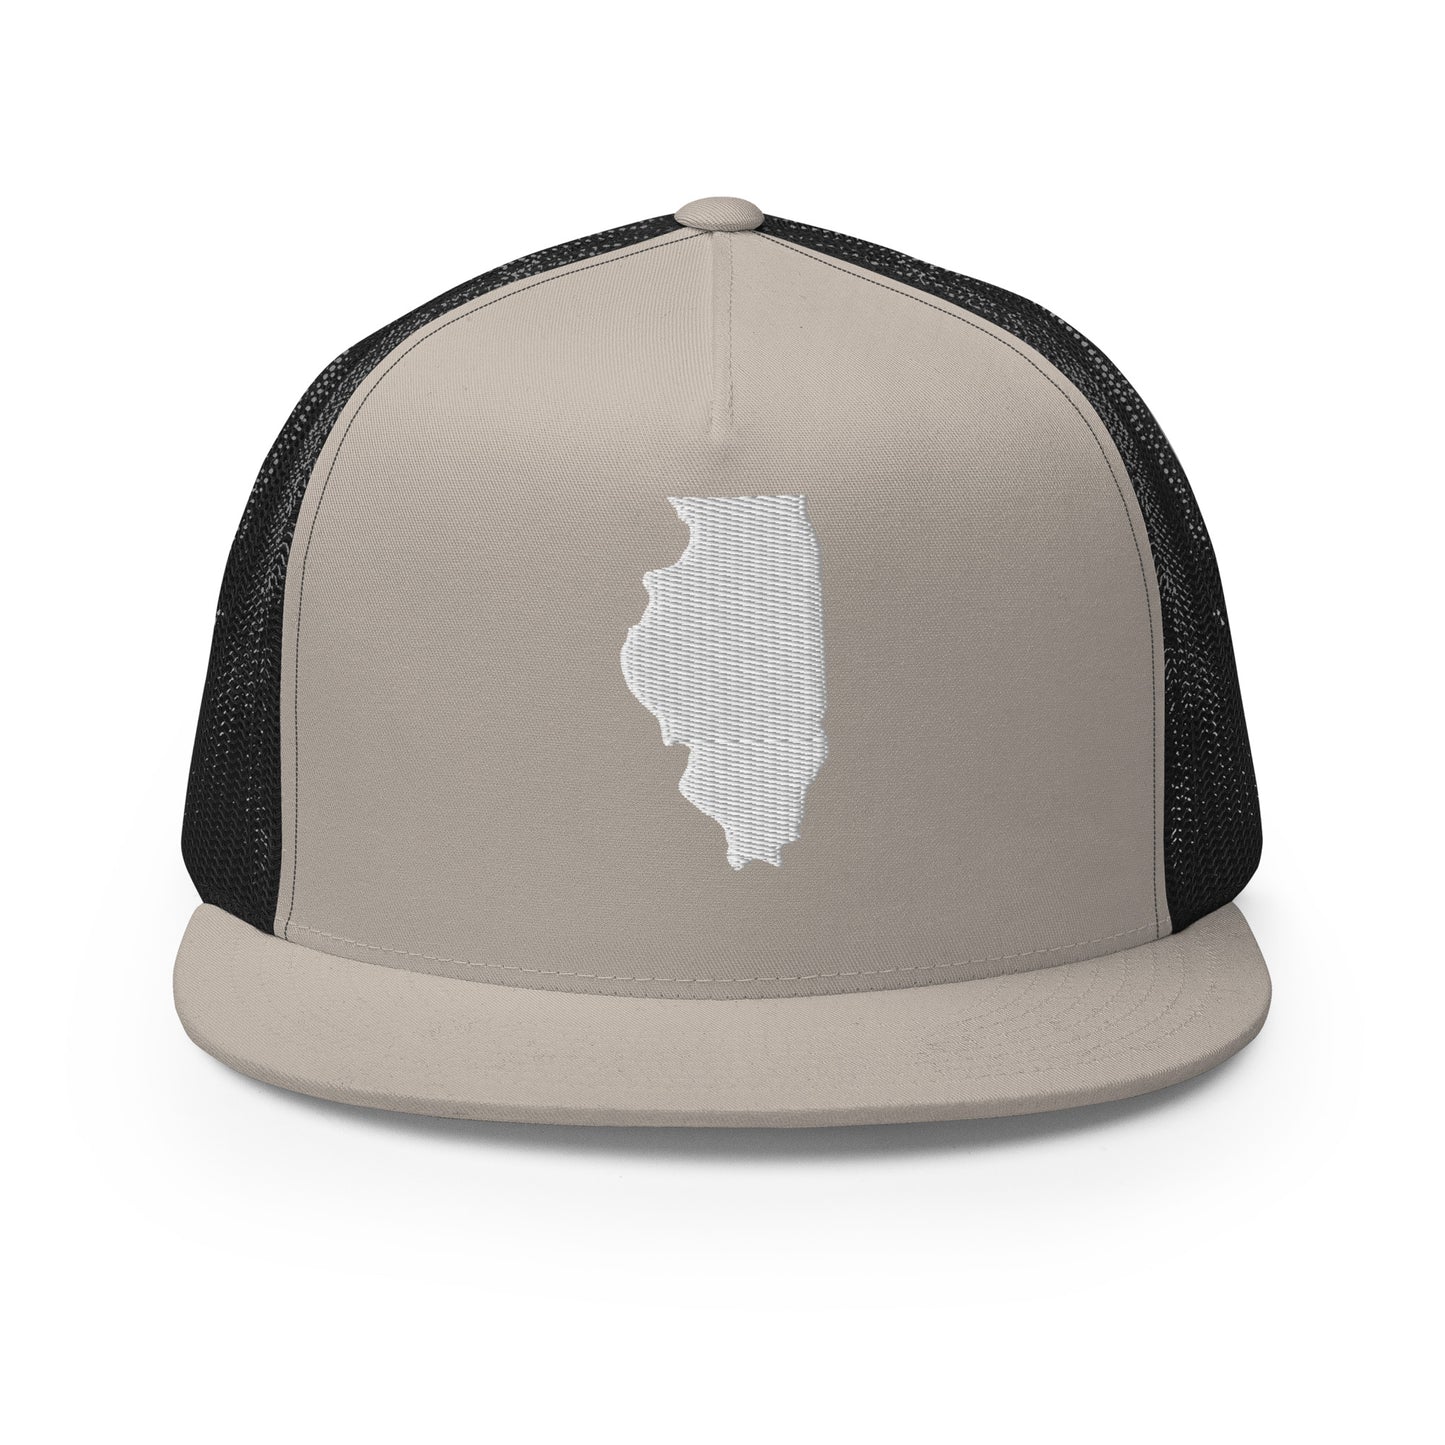 Illinois State Silhouette High 5 Panel A-Frame Snapback Trucker Hat